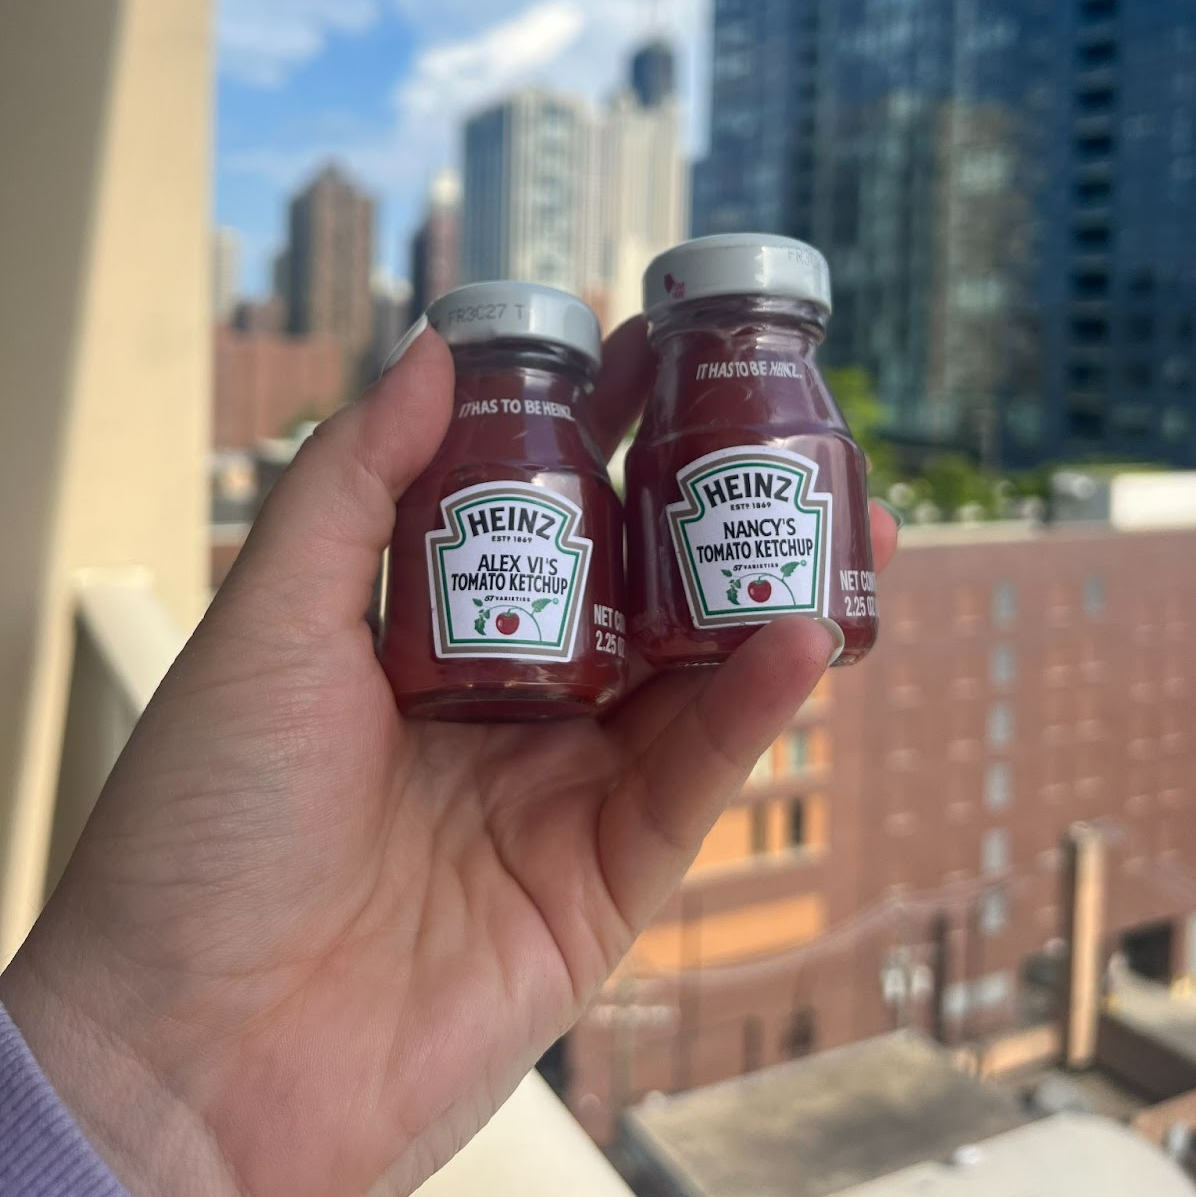 A hand holds two small Heinz ketchup bottles